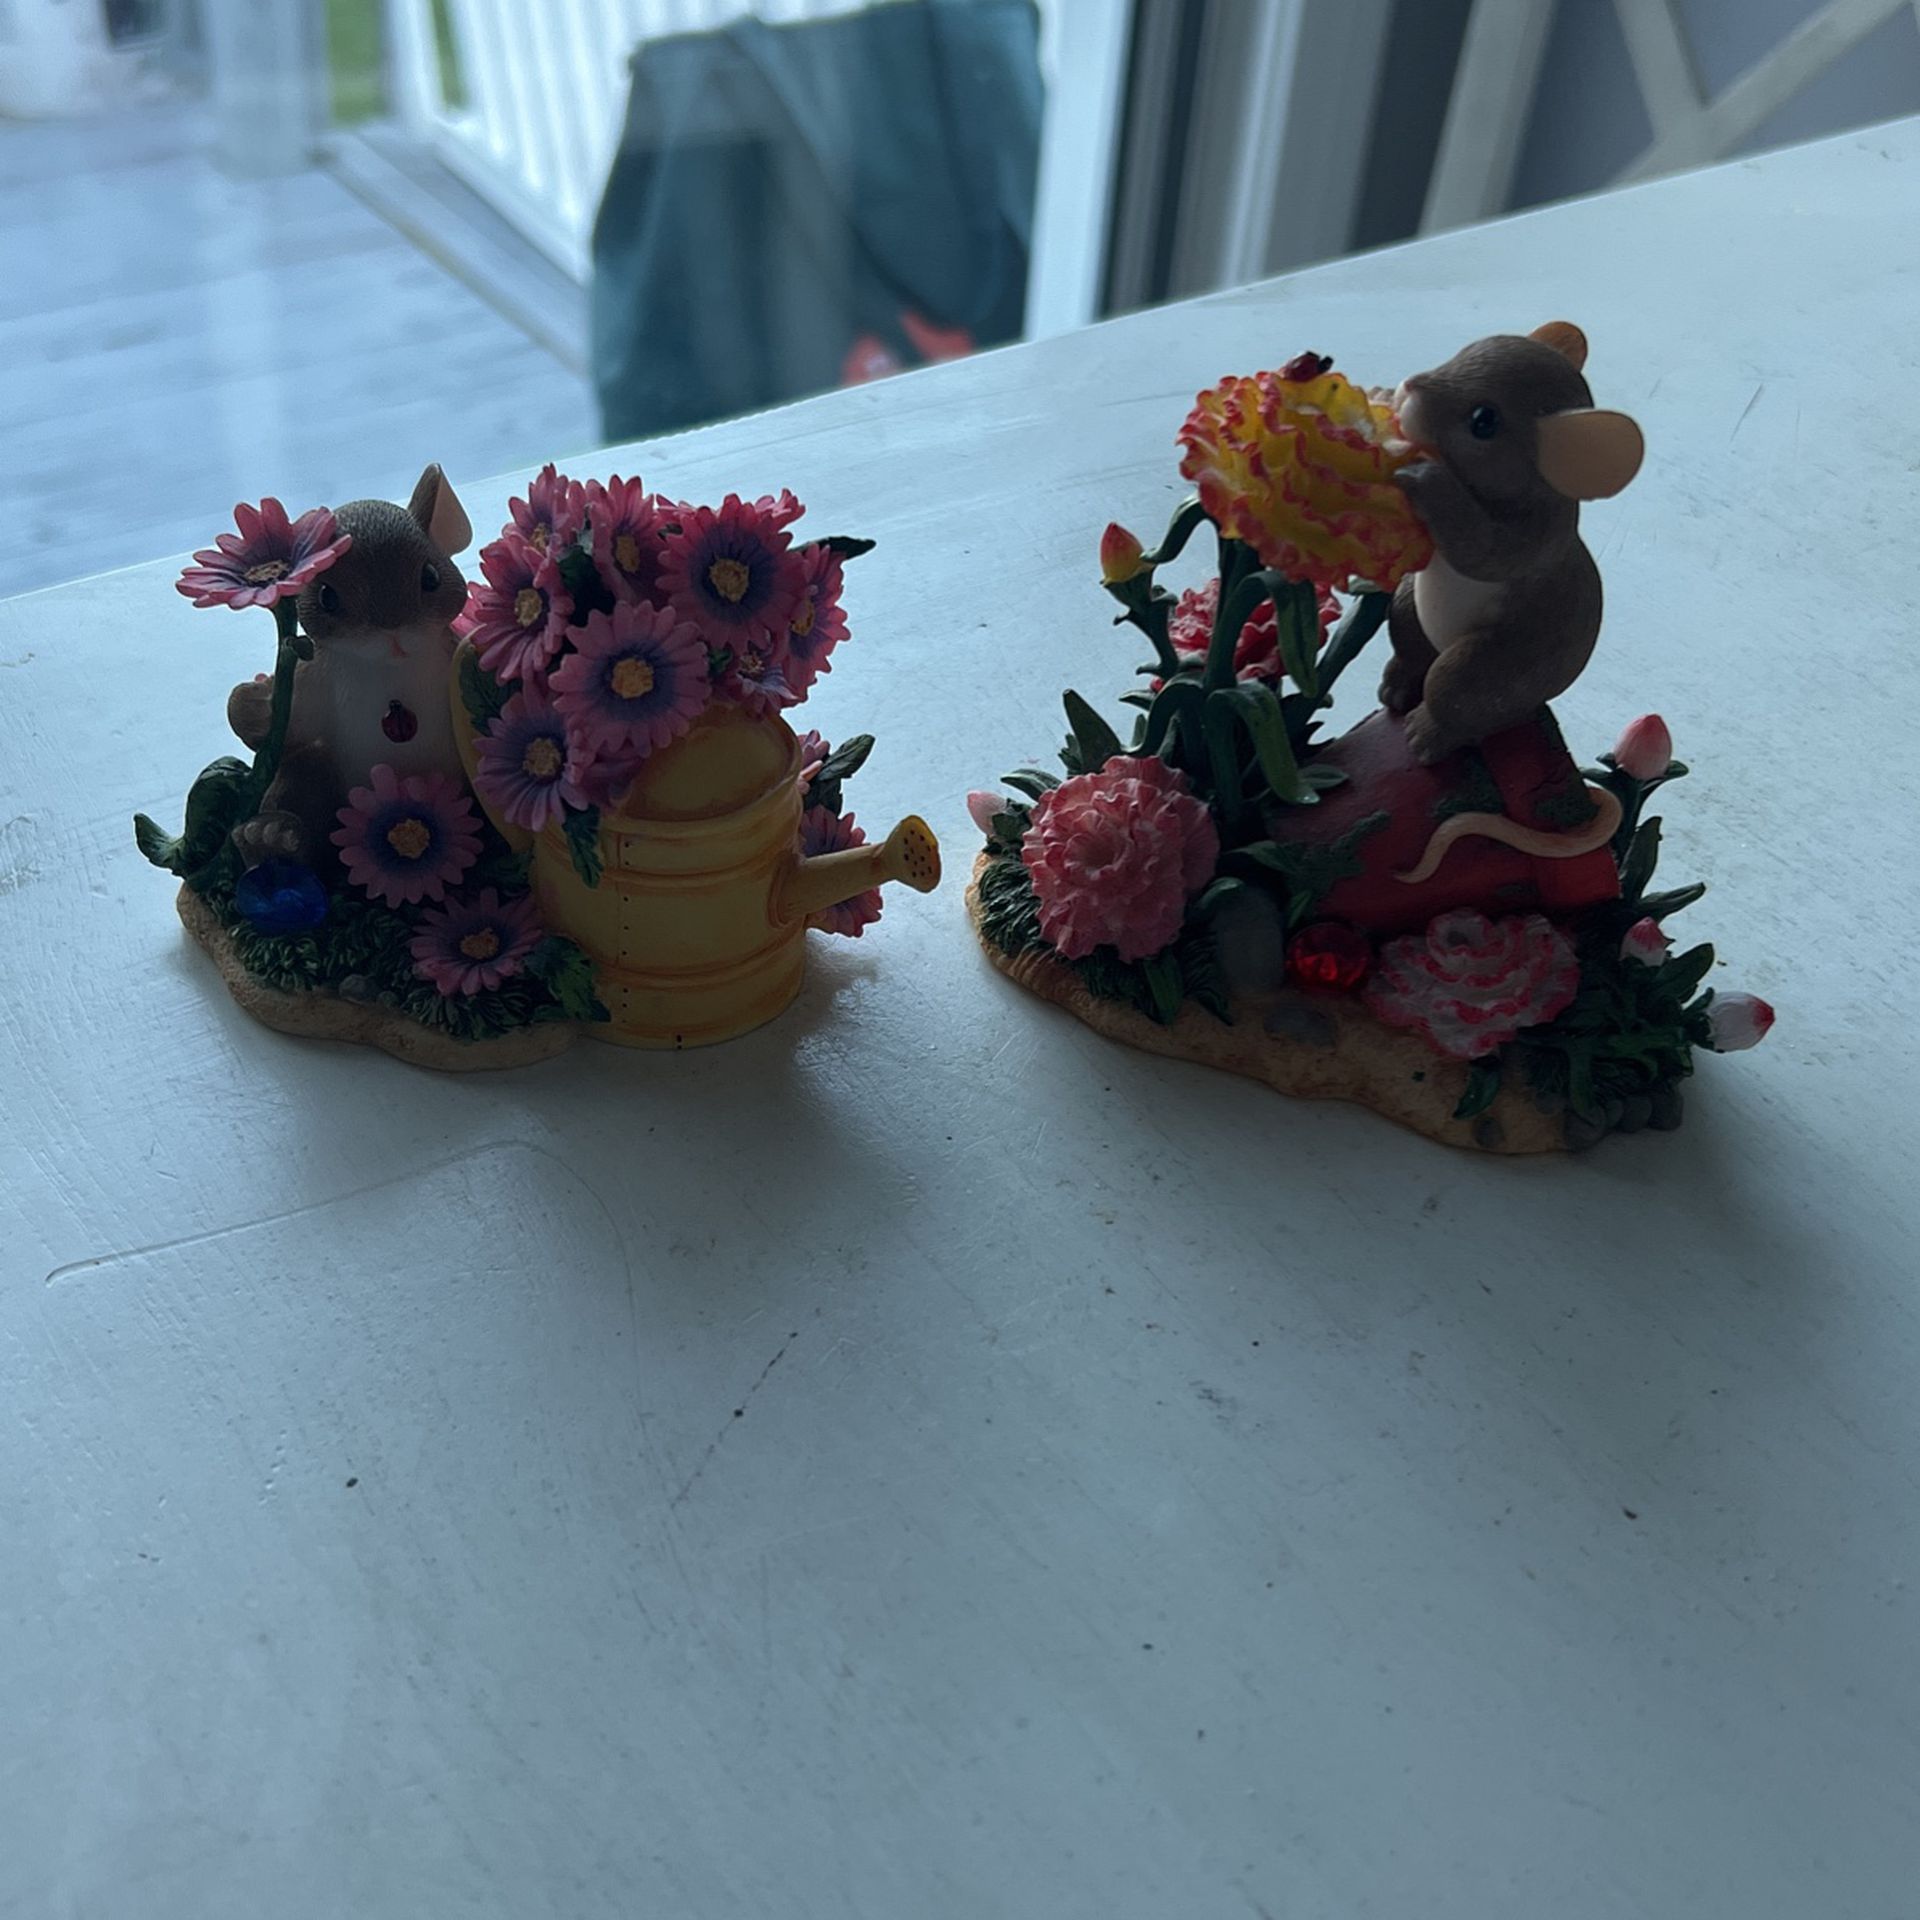 Charming Tails Figurines 